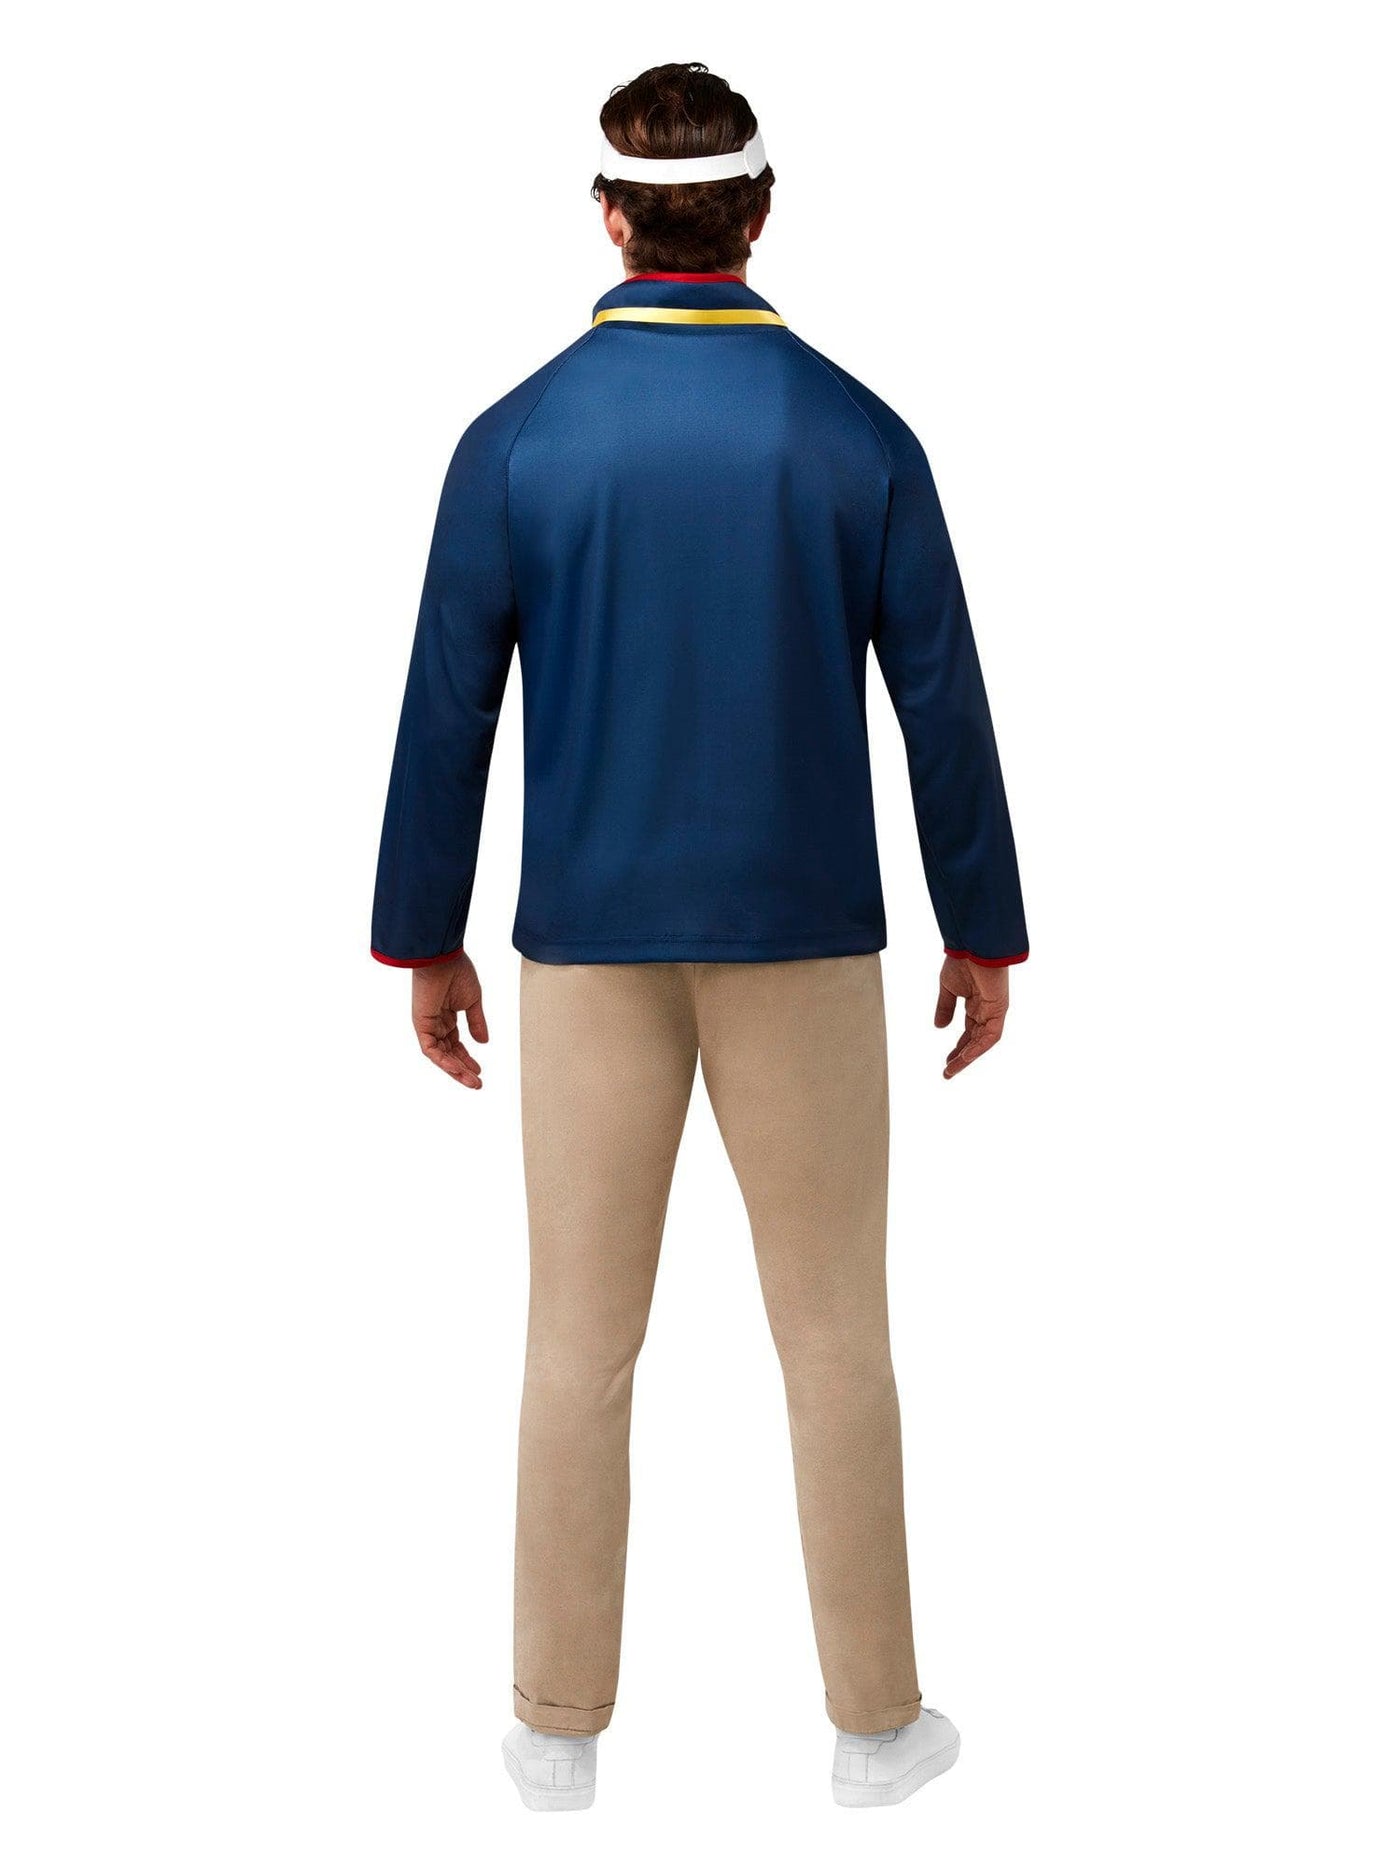 Ted Lasso Adult Costume